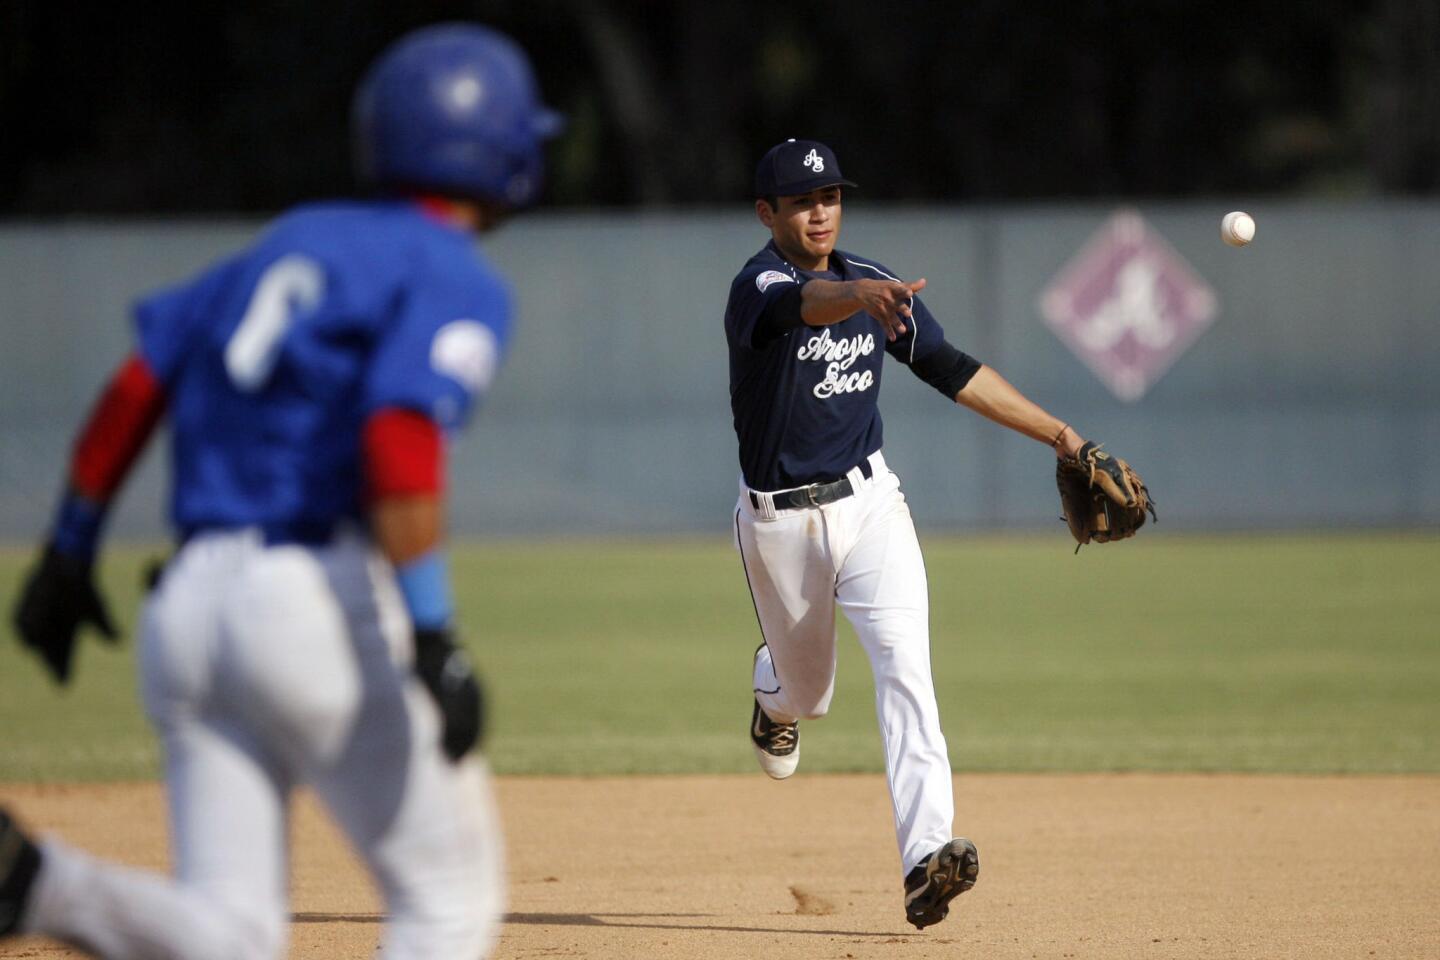 Arroyo Seco's David Olmedo-Barrera passes the ball to first base during a game against Puerto Rico, which took place at Major League Baseball Urban Youth Academy in Compton on Thursday, August 3, 2012.